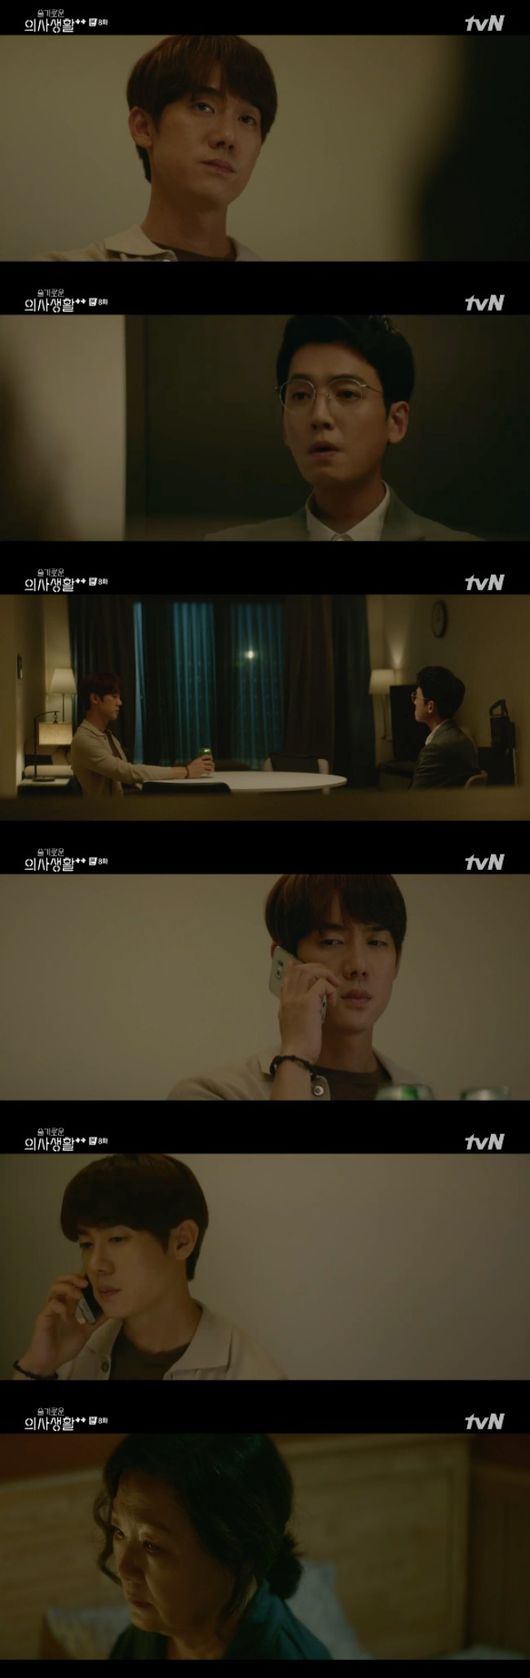 Sweet Doctor 2 Yoo Yeon-seok was frustrated after failing to propose to Shin Hyun-bin.In the 8th episode of the cable channel tvNs Thursday drama Sweet Doctor Life Season 2 (playplayed by Lee Woo-jung and directed by Shin Won-ho), which aired on the afternoon of the 12th, Ahn Jung-won (Yoo Yeon-seok) was shown disappointed without doing the proposal he prepared for Shin Hyun-bin.The stableman was preparing for the Proposal after he had made an appointment with the old winter and the church, and he had decided to marry, but the old winter had rushed home after his mother had undergone surgery.The long winter was out of touch after leaving a text message.When he returned home, Ahn drank alcohol and soothed his bitter stomach.Kim Joon-wan (Jung Kyung-ho), who learned that Lee Ik-soon (Kwak Sun-young) returned to Korea, was also in a difficult situation.Kim Joon-wan, drinking with An Jeong-won, assumed something was going on with each other but said nothing.An Jeong-won and Kim Joon-wan both had a hard time spending uncomfortable nights.TVN broadcast screen capture